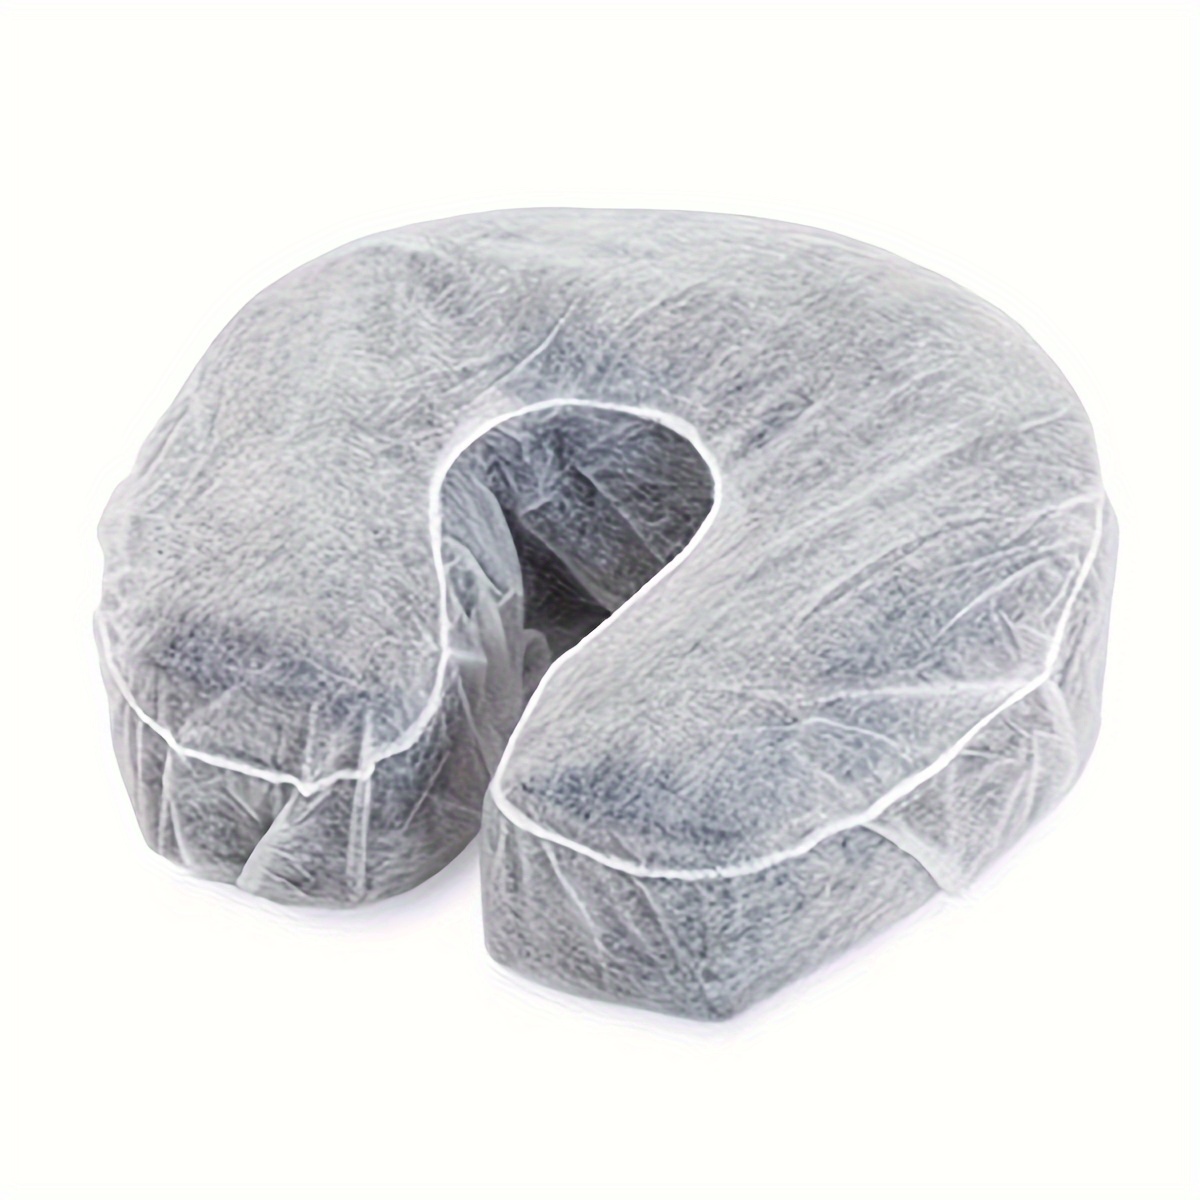 

50pcs/set Disposable Face Cradle Covers, Non-sticking Massage Face Covers, Headrest Covers For Massage Tables, Universal Size